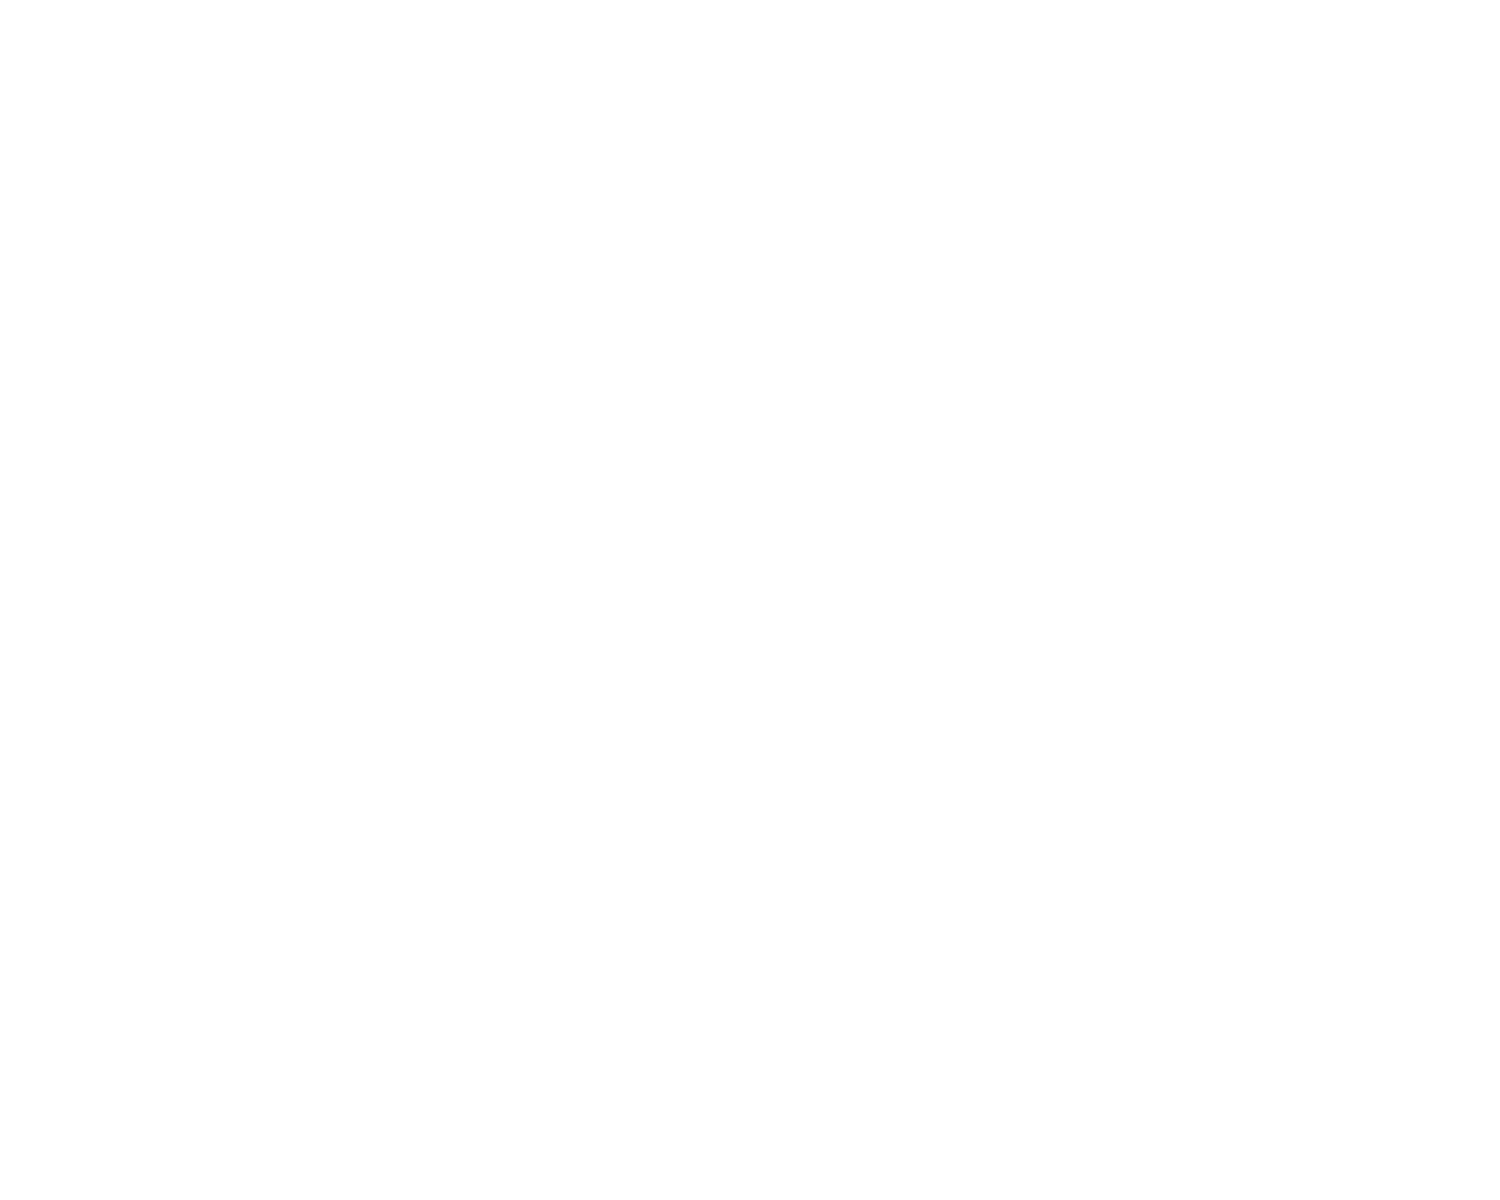 uneARTh